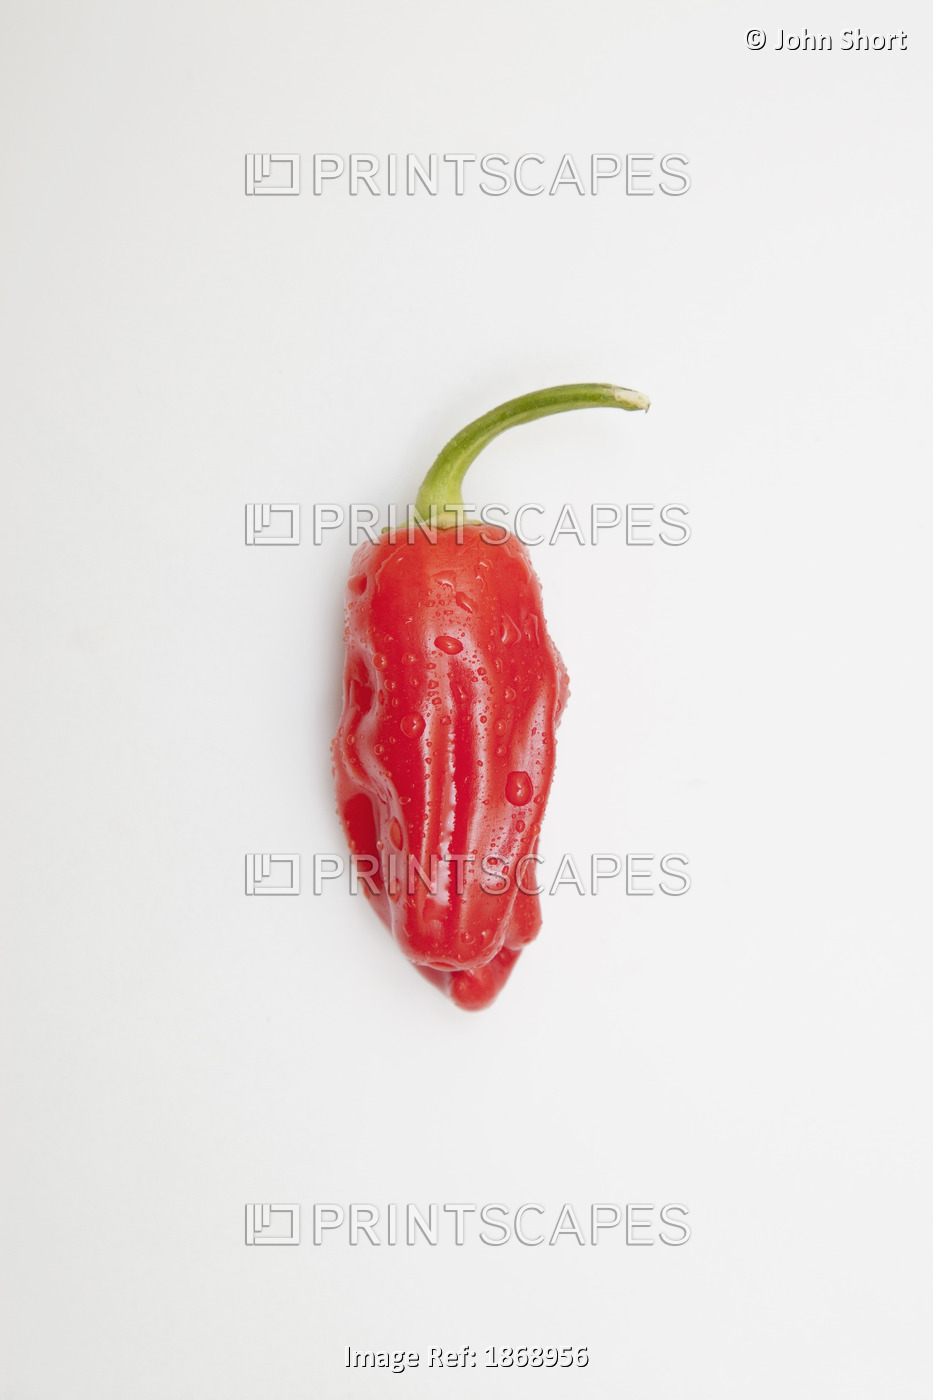 A Red Jalapeno Pepper That Looks Hot With Steam